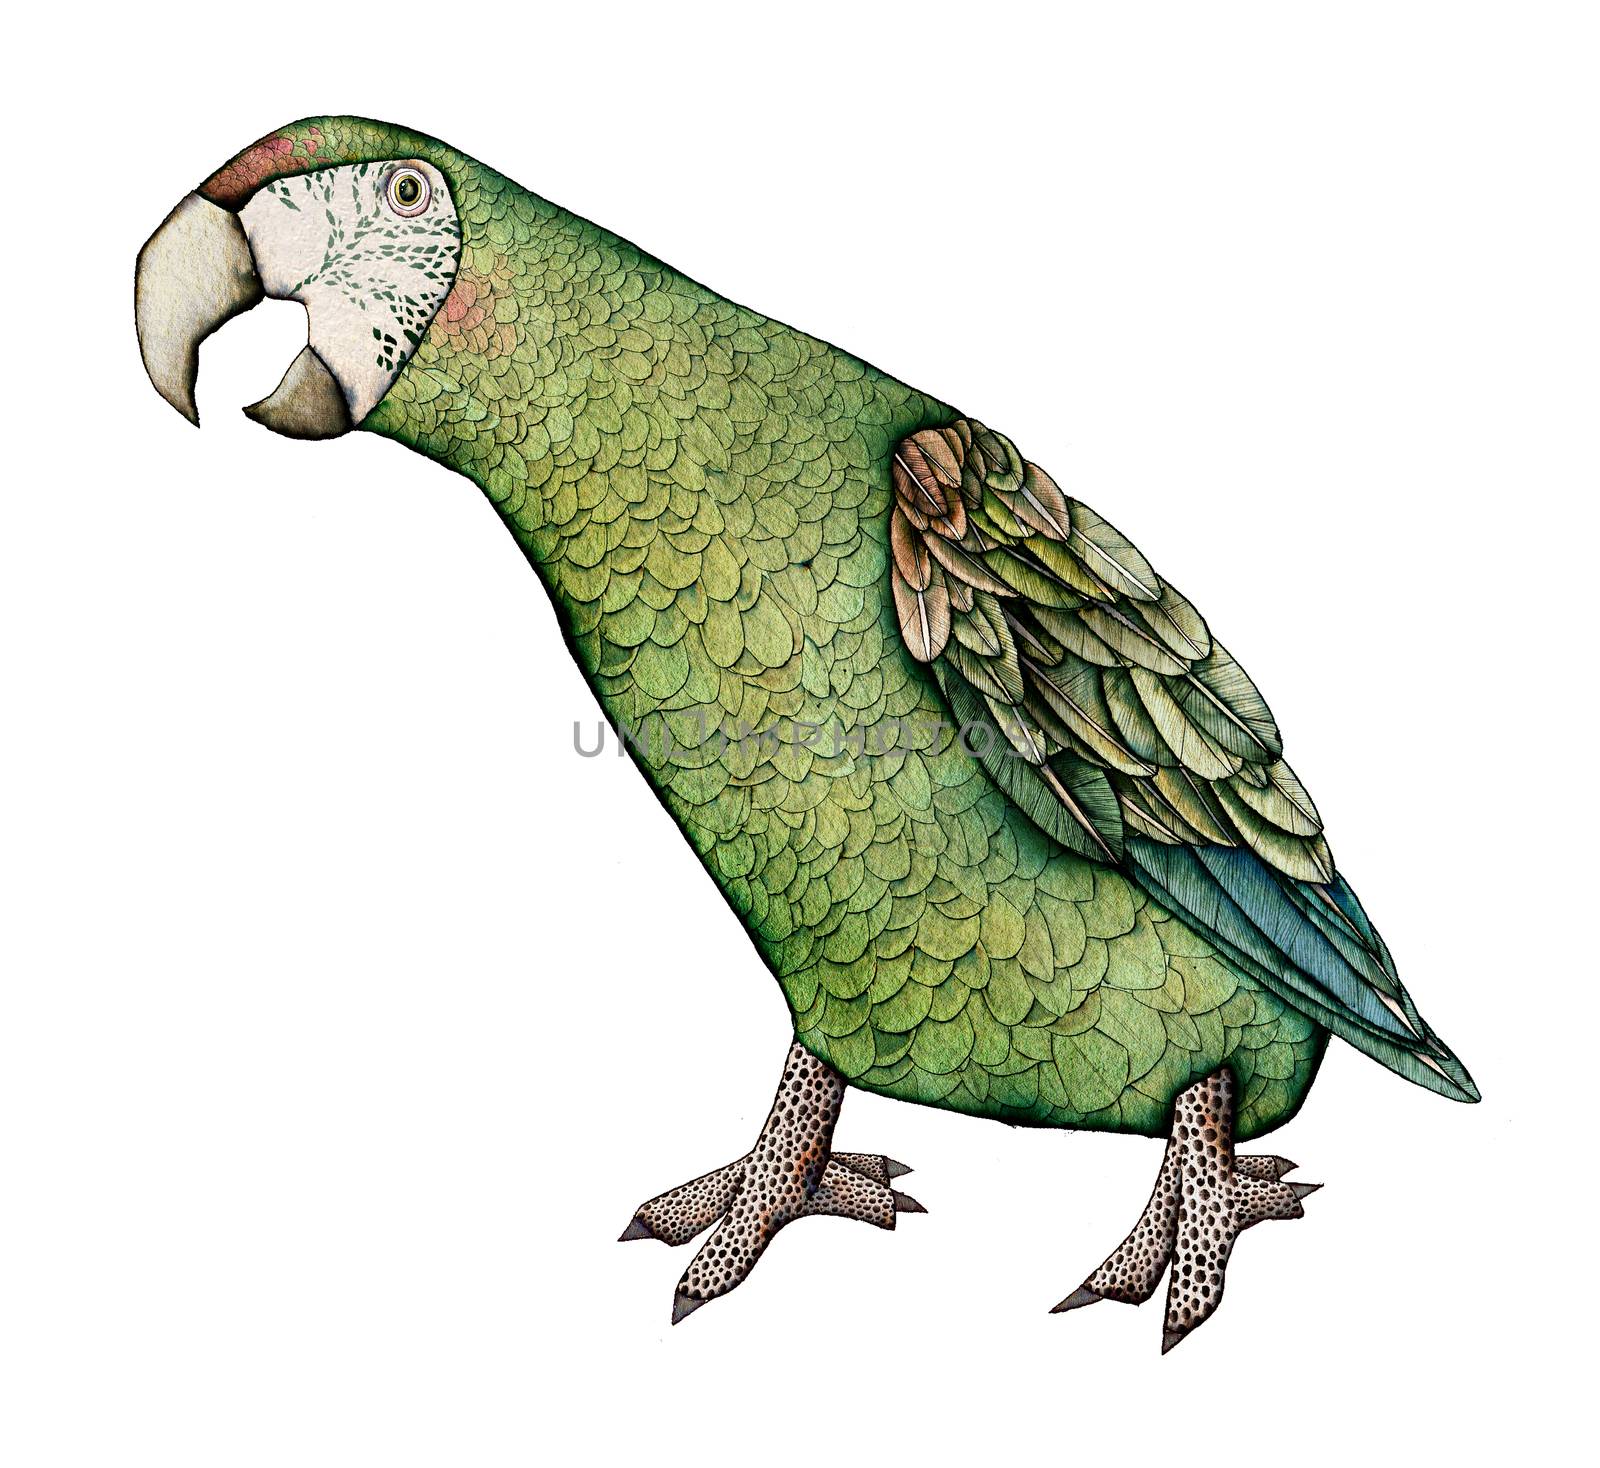 Macaw, milatary green color artistic illustration